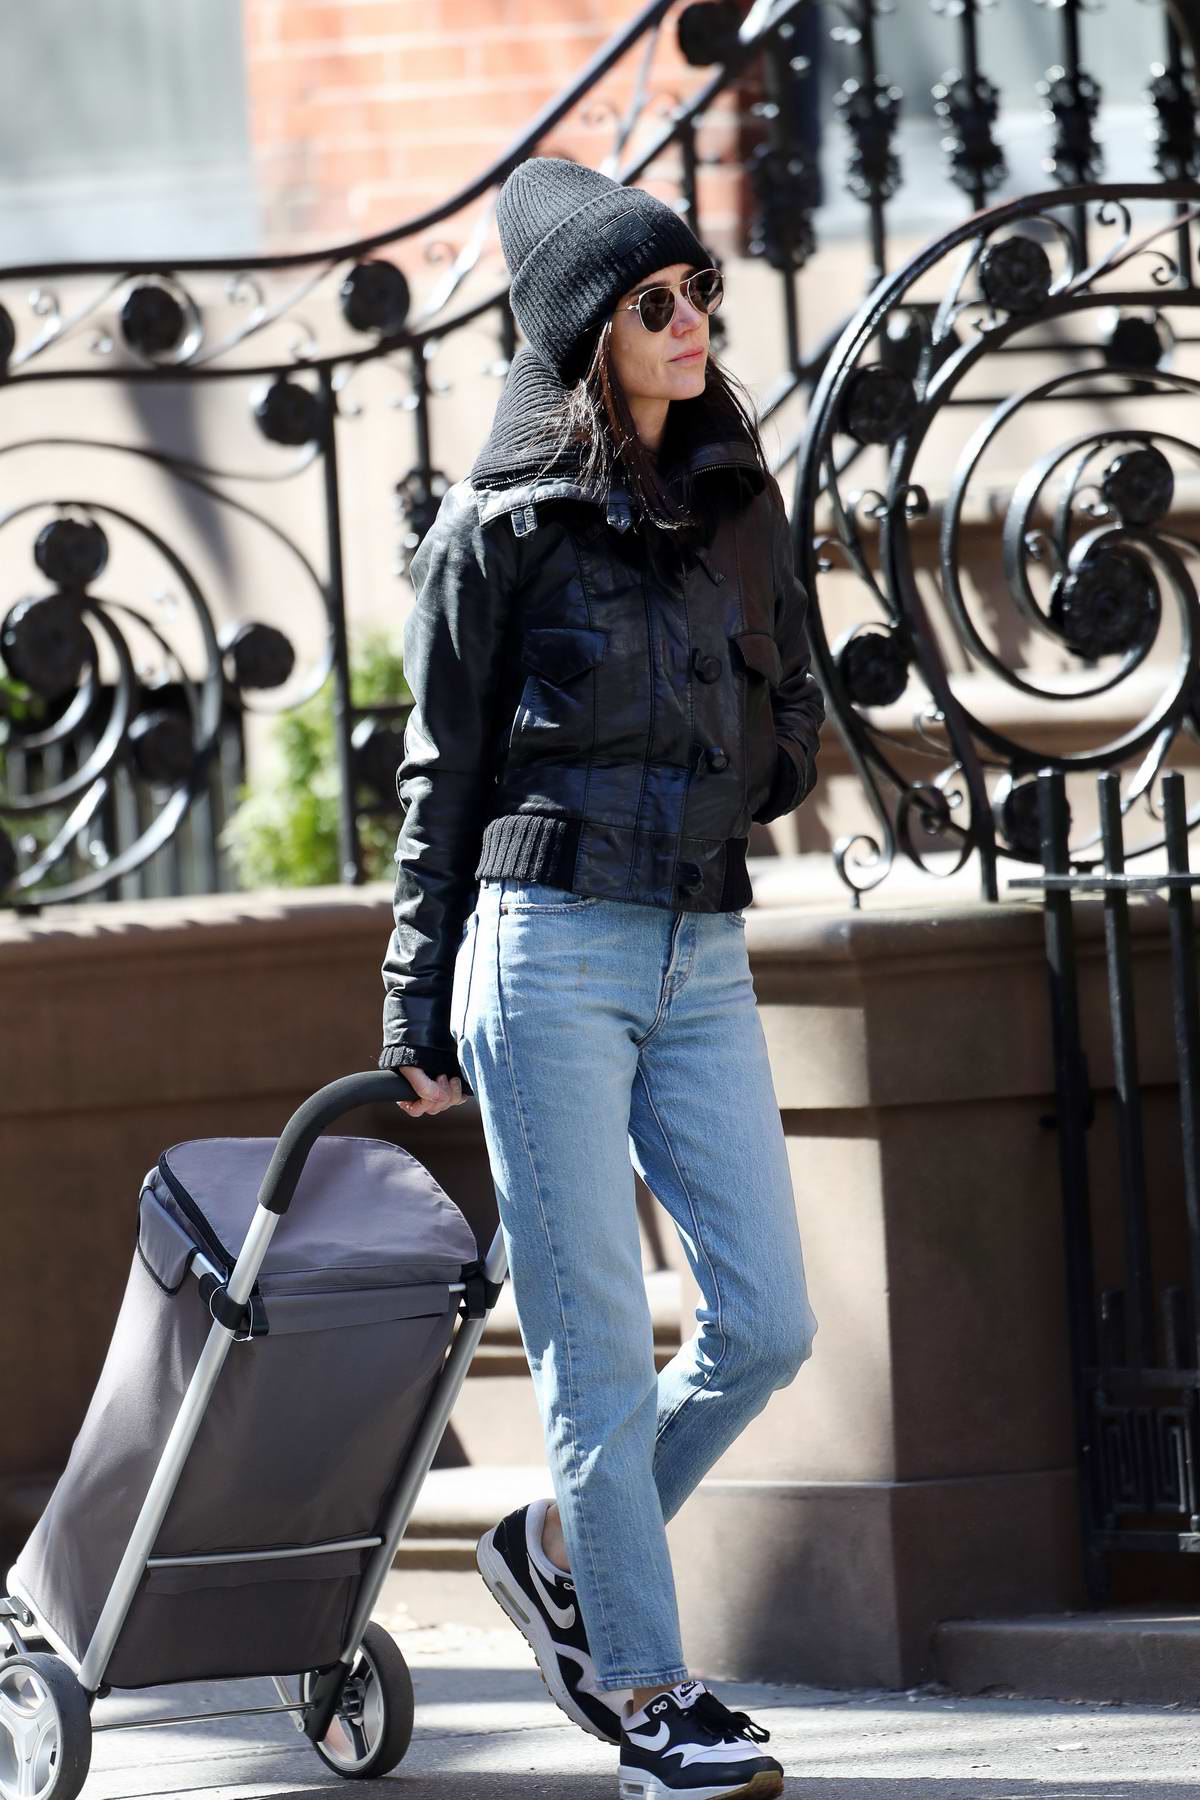 Jennifer Connelly bundles up in a black beanie, matching jacket, jeans, and  Nike trainer while out